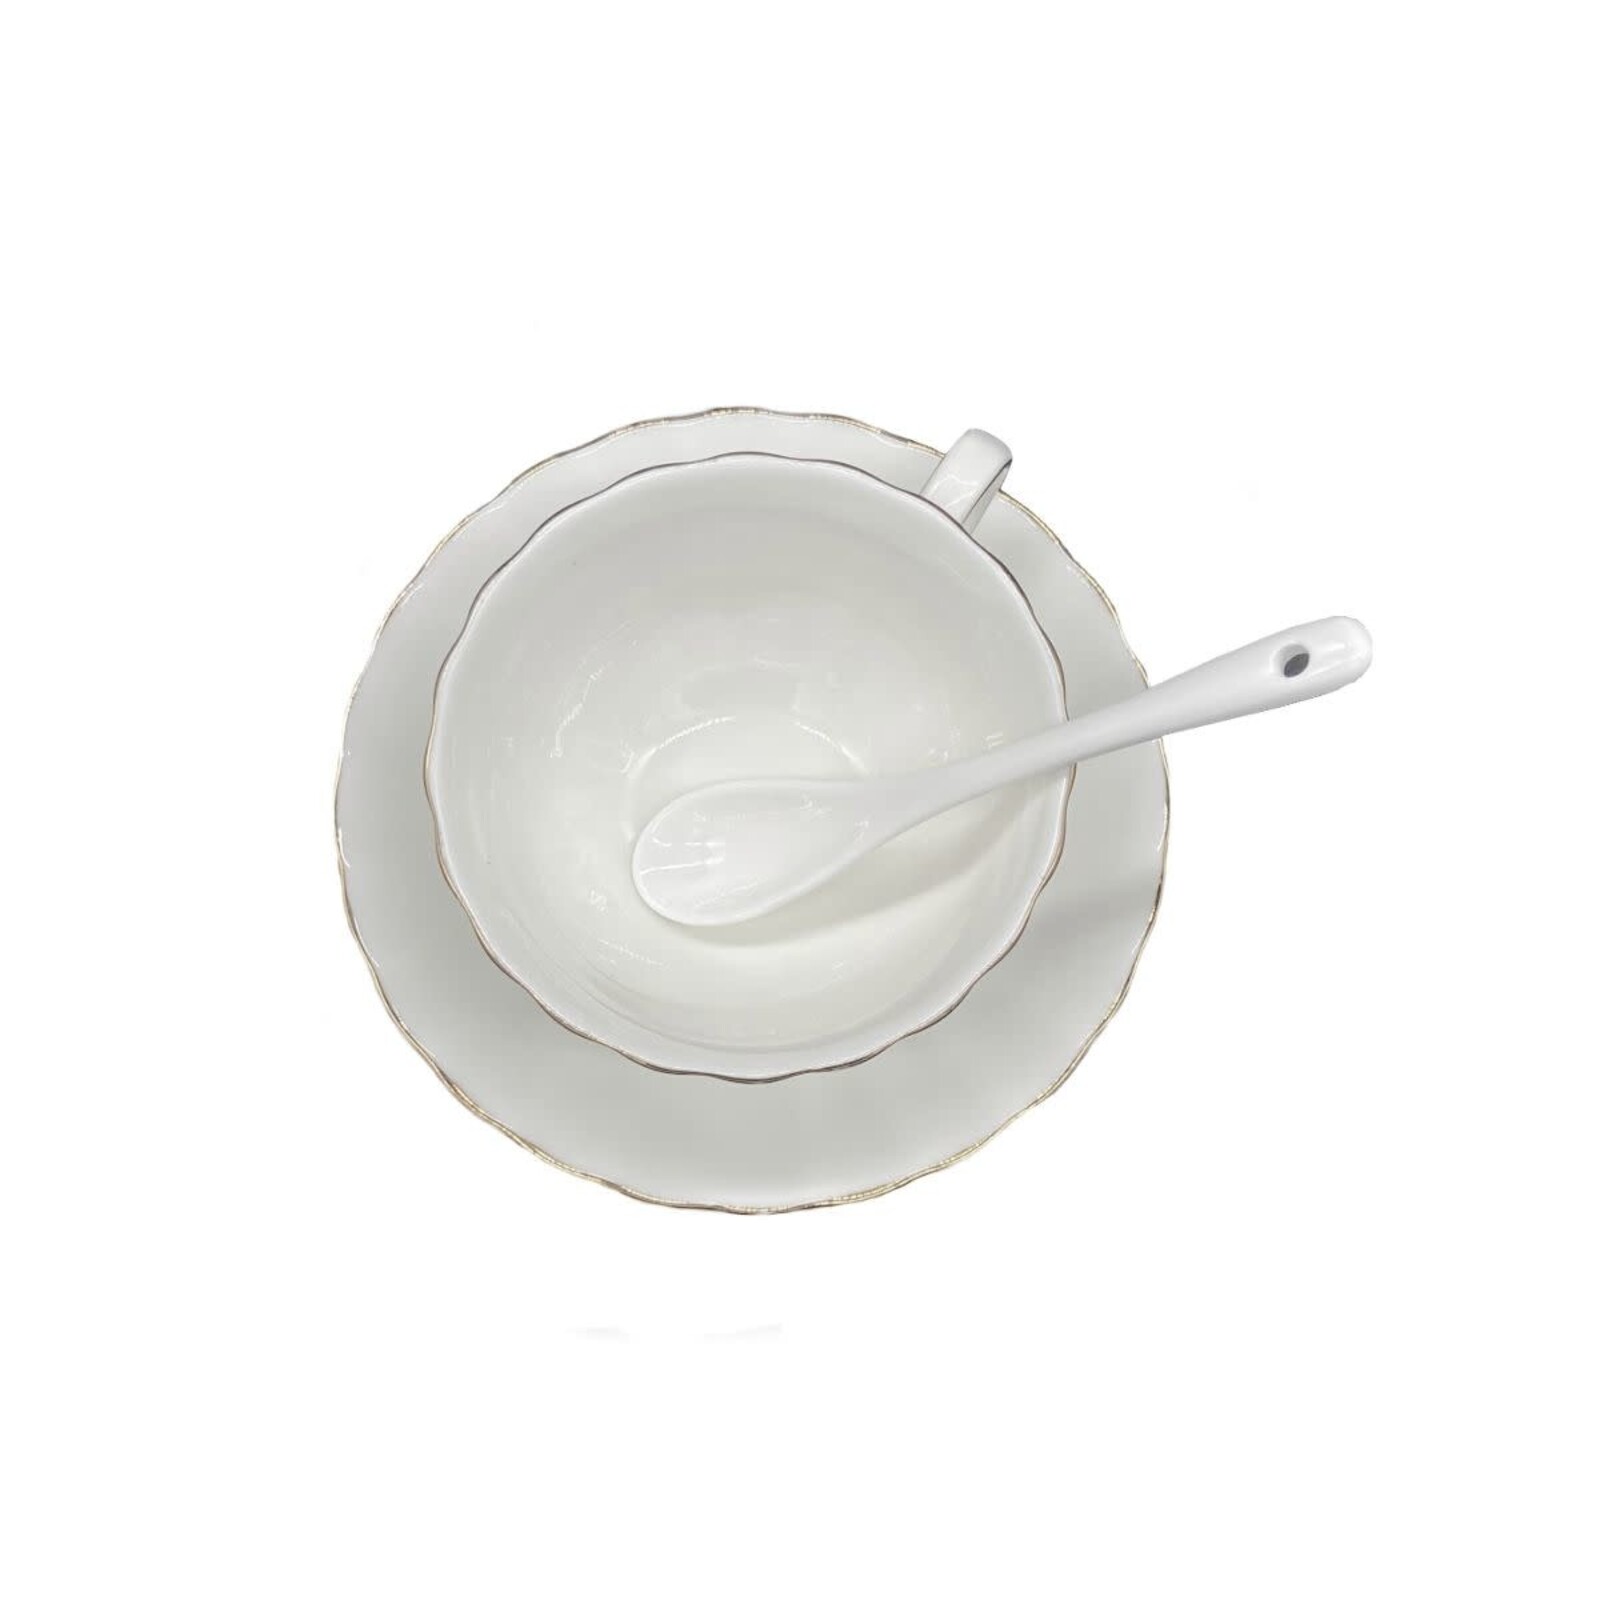 The Gallery Espresso Cup,Saucer and Spoon   X0021RSQAF loading=